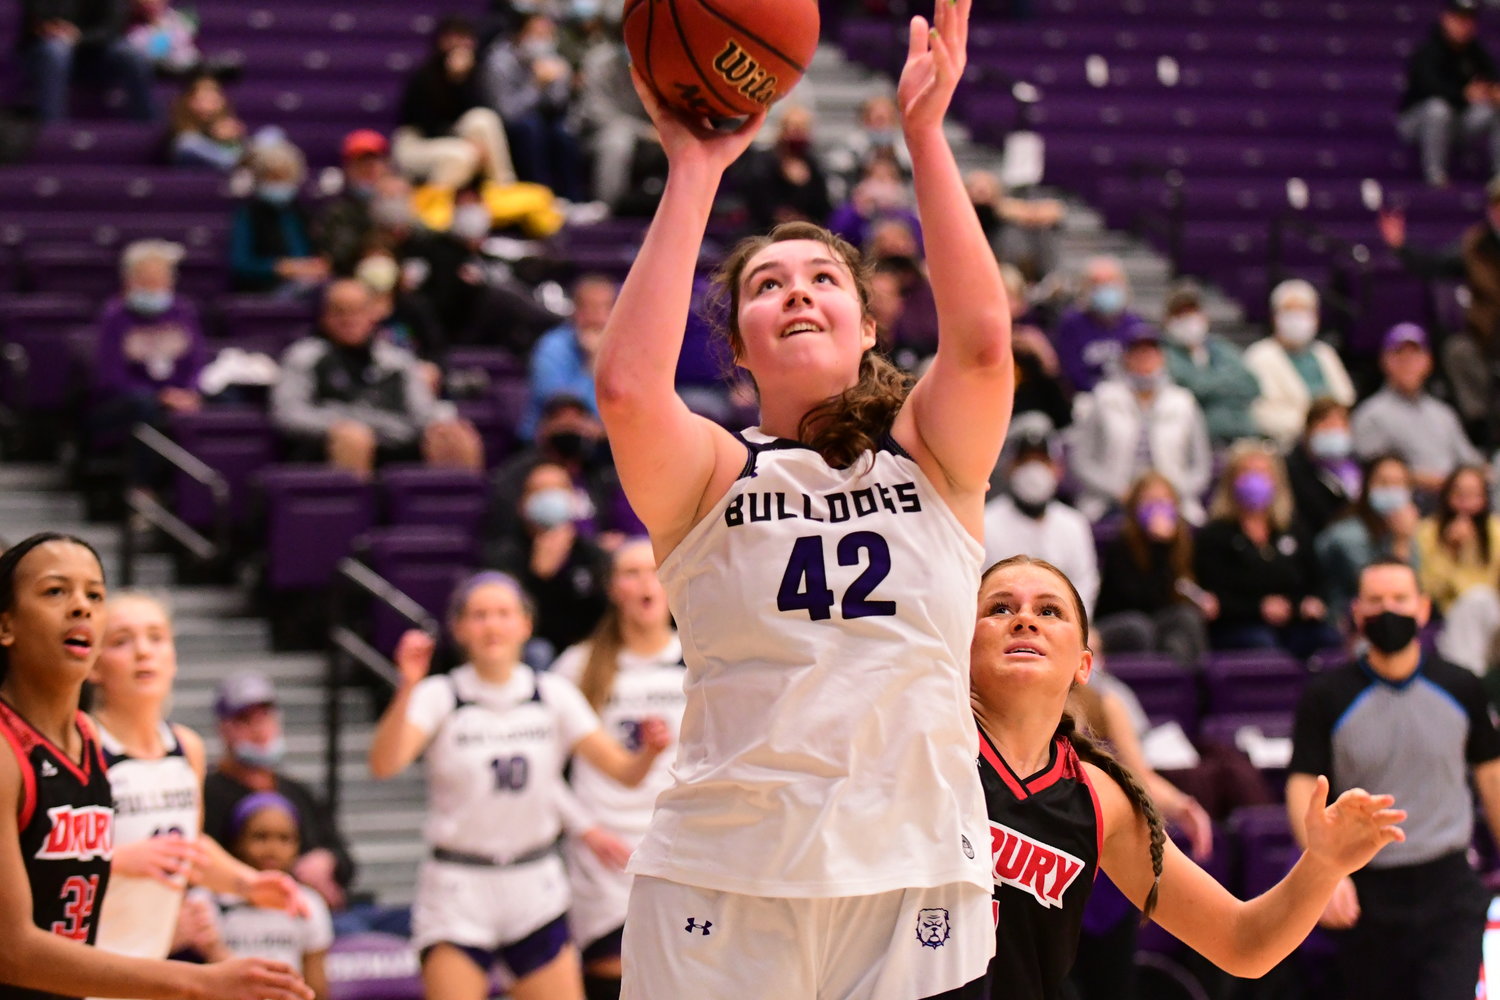 Truman senior forward Allison Thomas puts up a layup Monday against Drury, where she set a new personal single-game scoring record with 19 points.